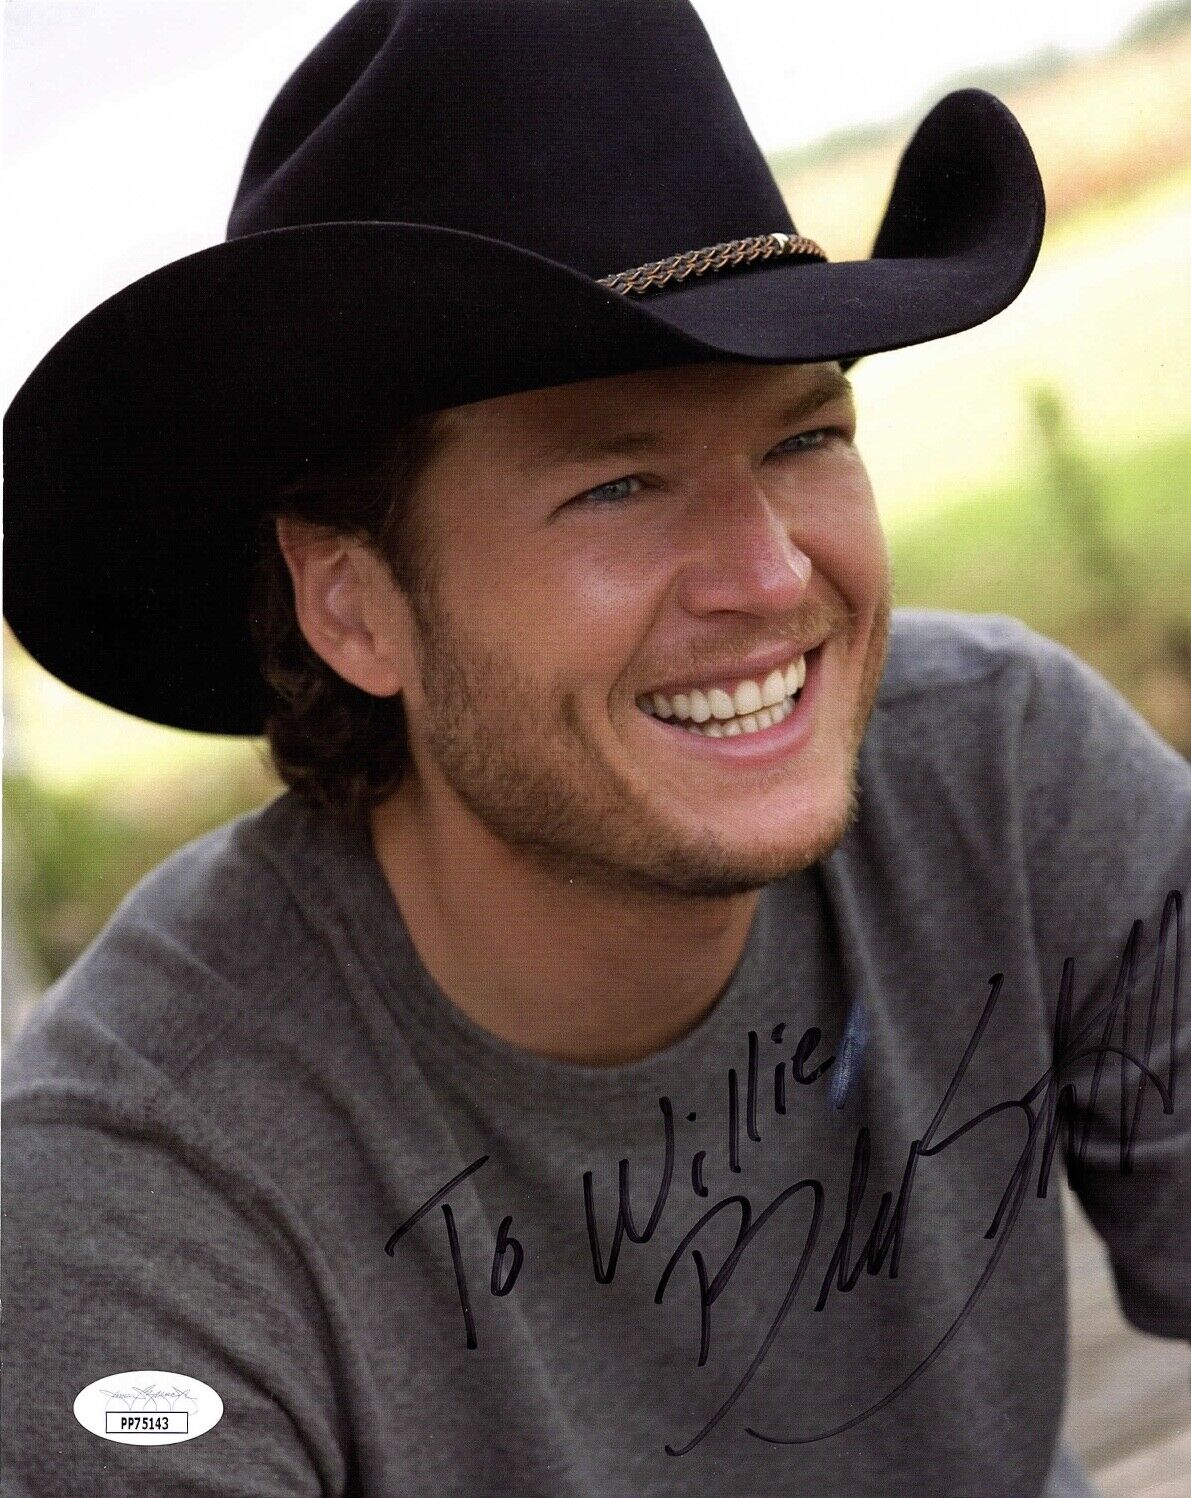 BLAKE SHELTON Autograph SIGNED 8x10 Photo Poster painting 2007 Country Music JSA CERTIFIED